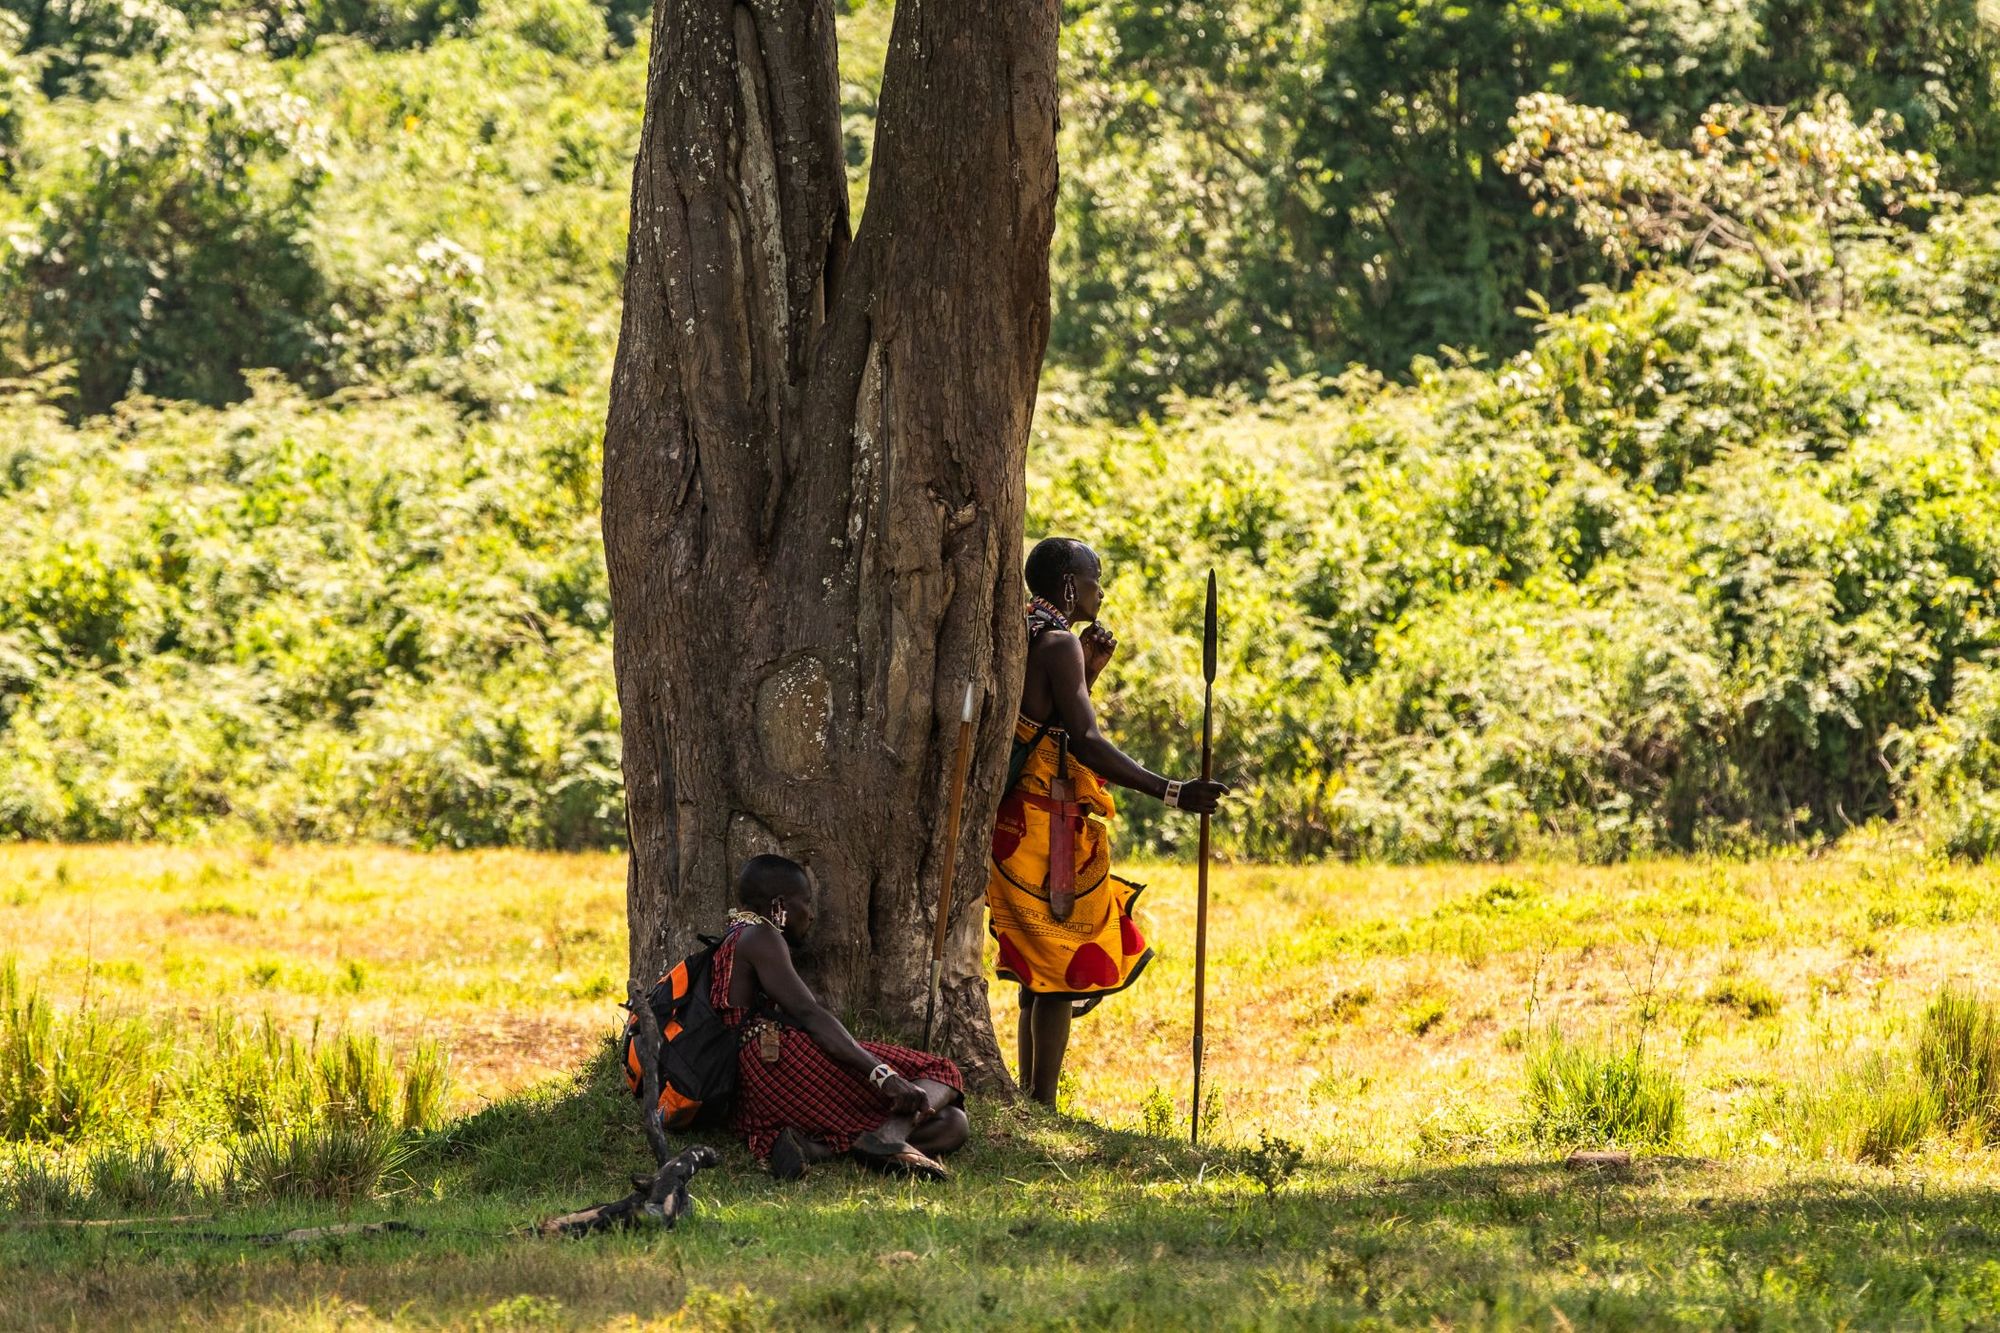 Two members of the Maasai tribe looking out on the lush vegetation of the Loita Hills. Photo: Much Better Adventures